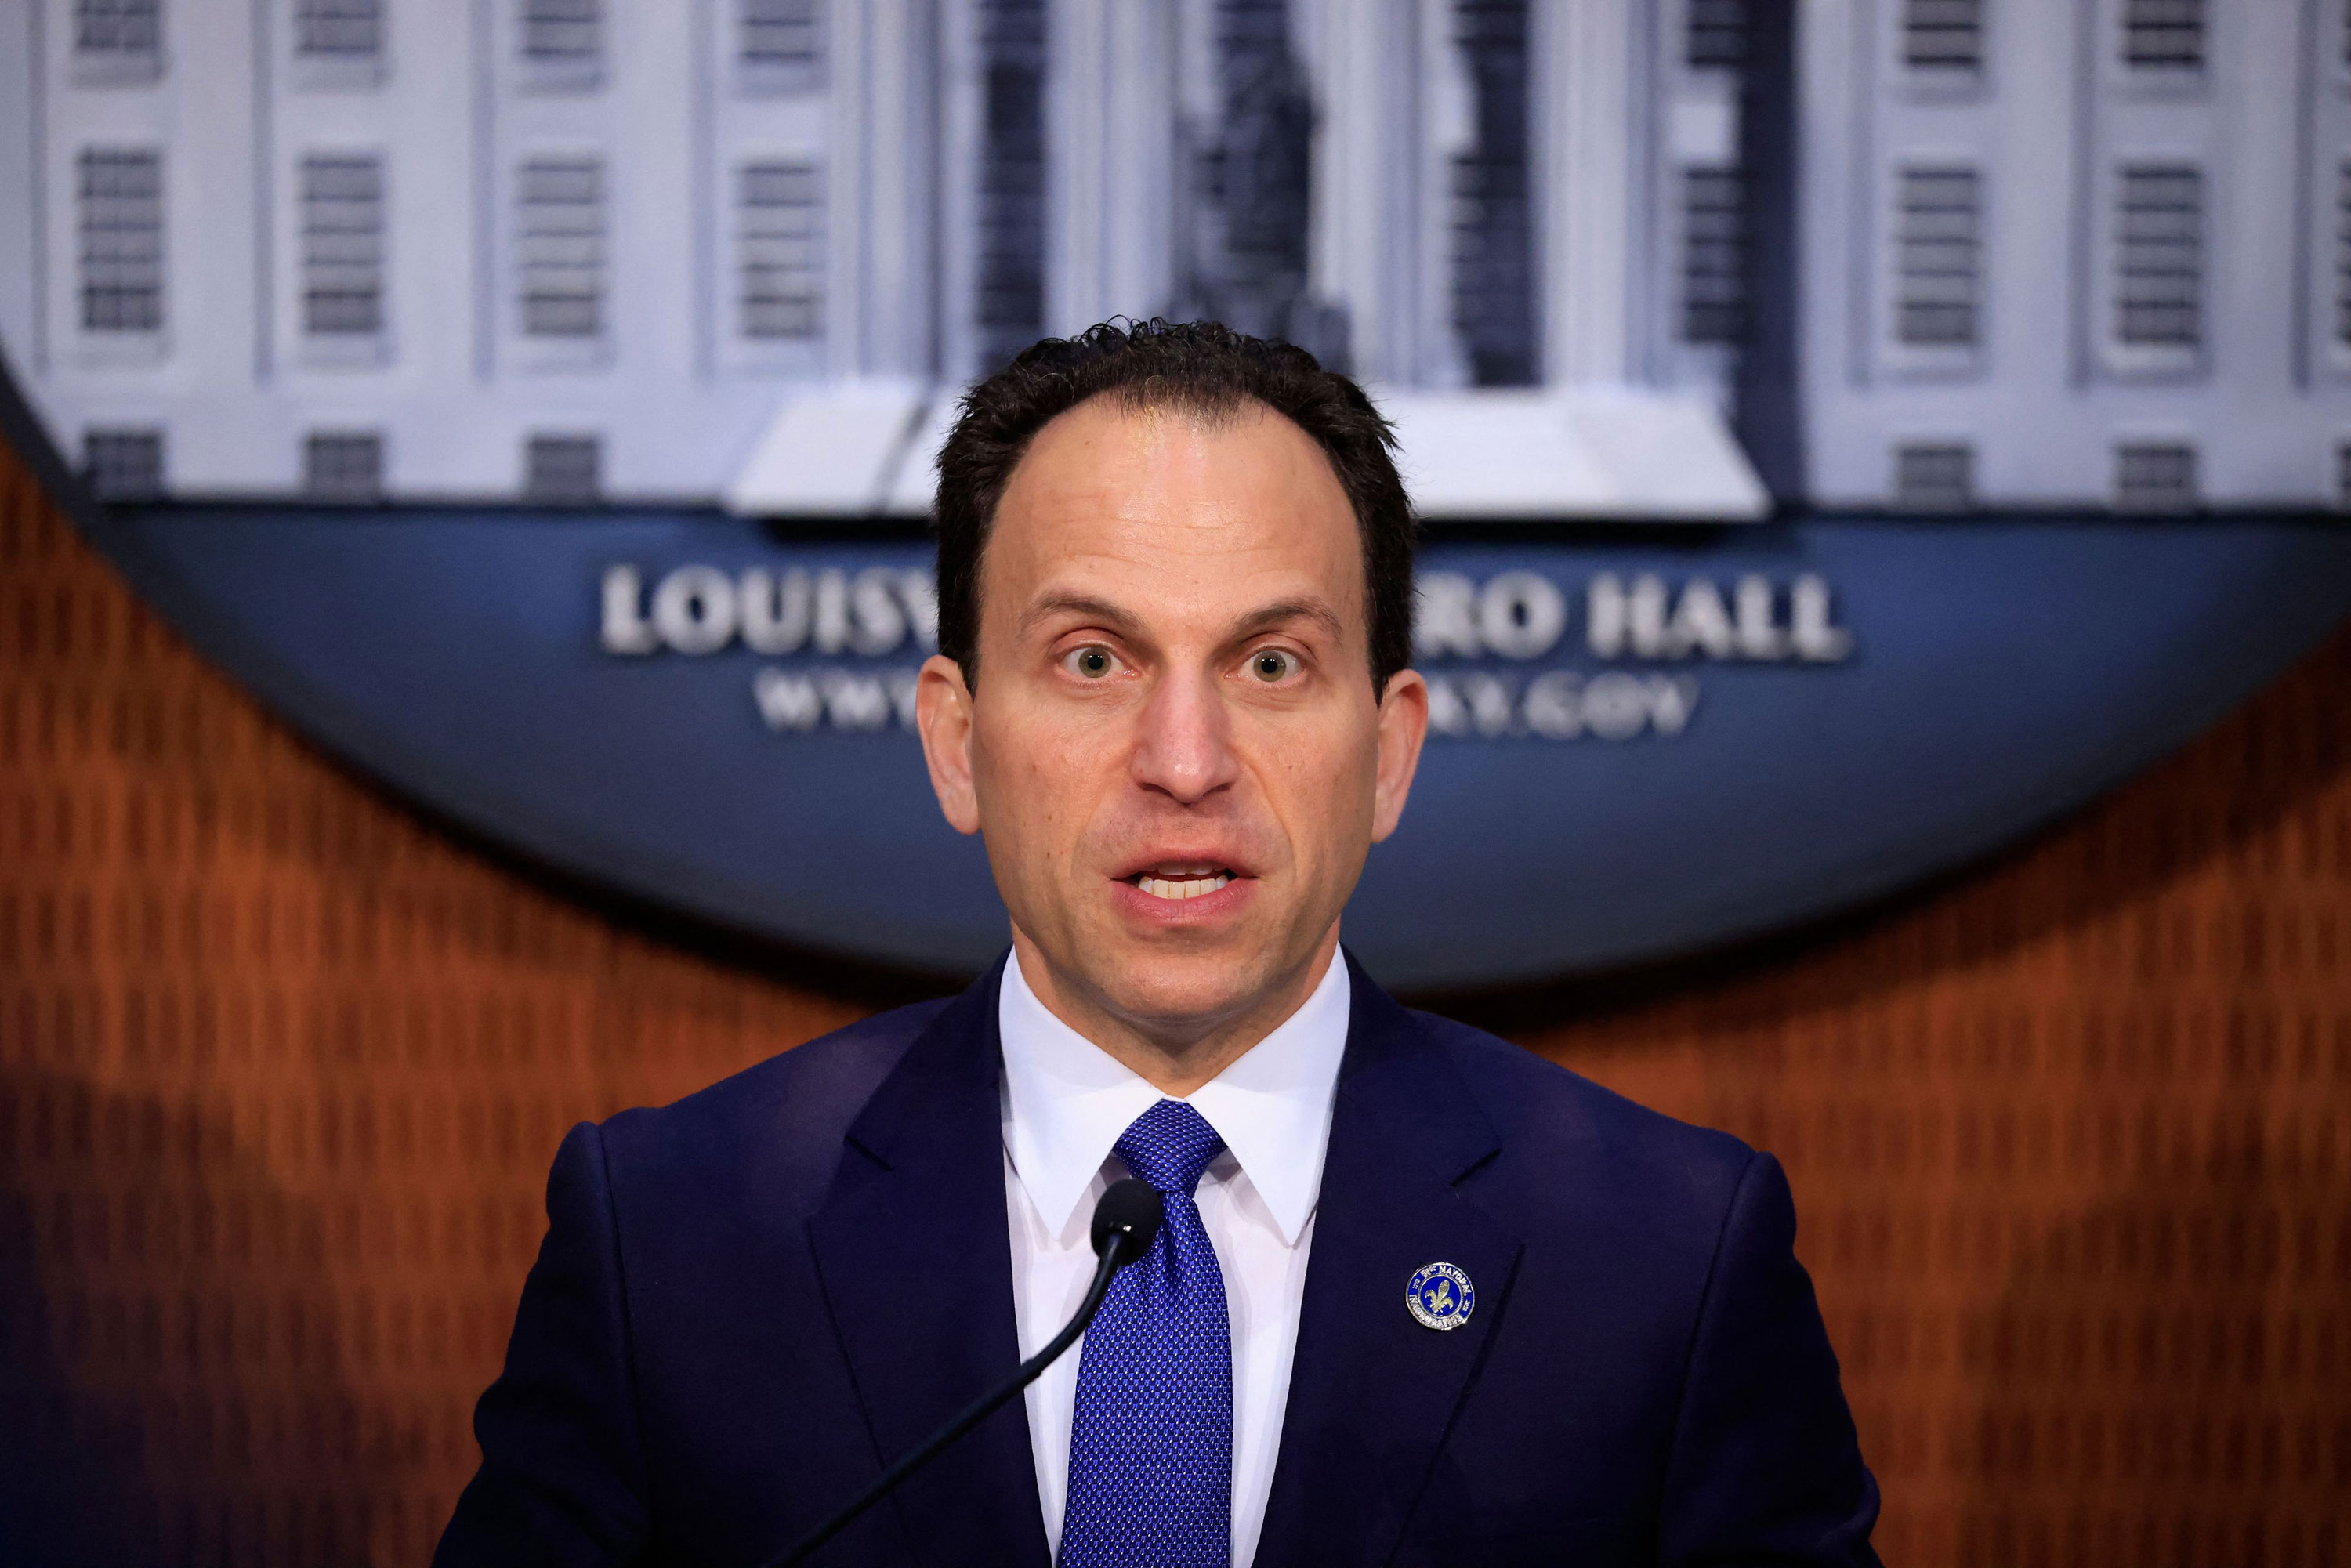 Louisville Mayor Craig Greenberg speaks during a press conference on the Justice Department's findings of the civil rights investigation into the Louisville Metro Police Department and Louisville Metro Government on March 8 in Louisville, Kentucky. 